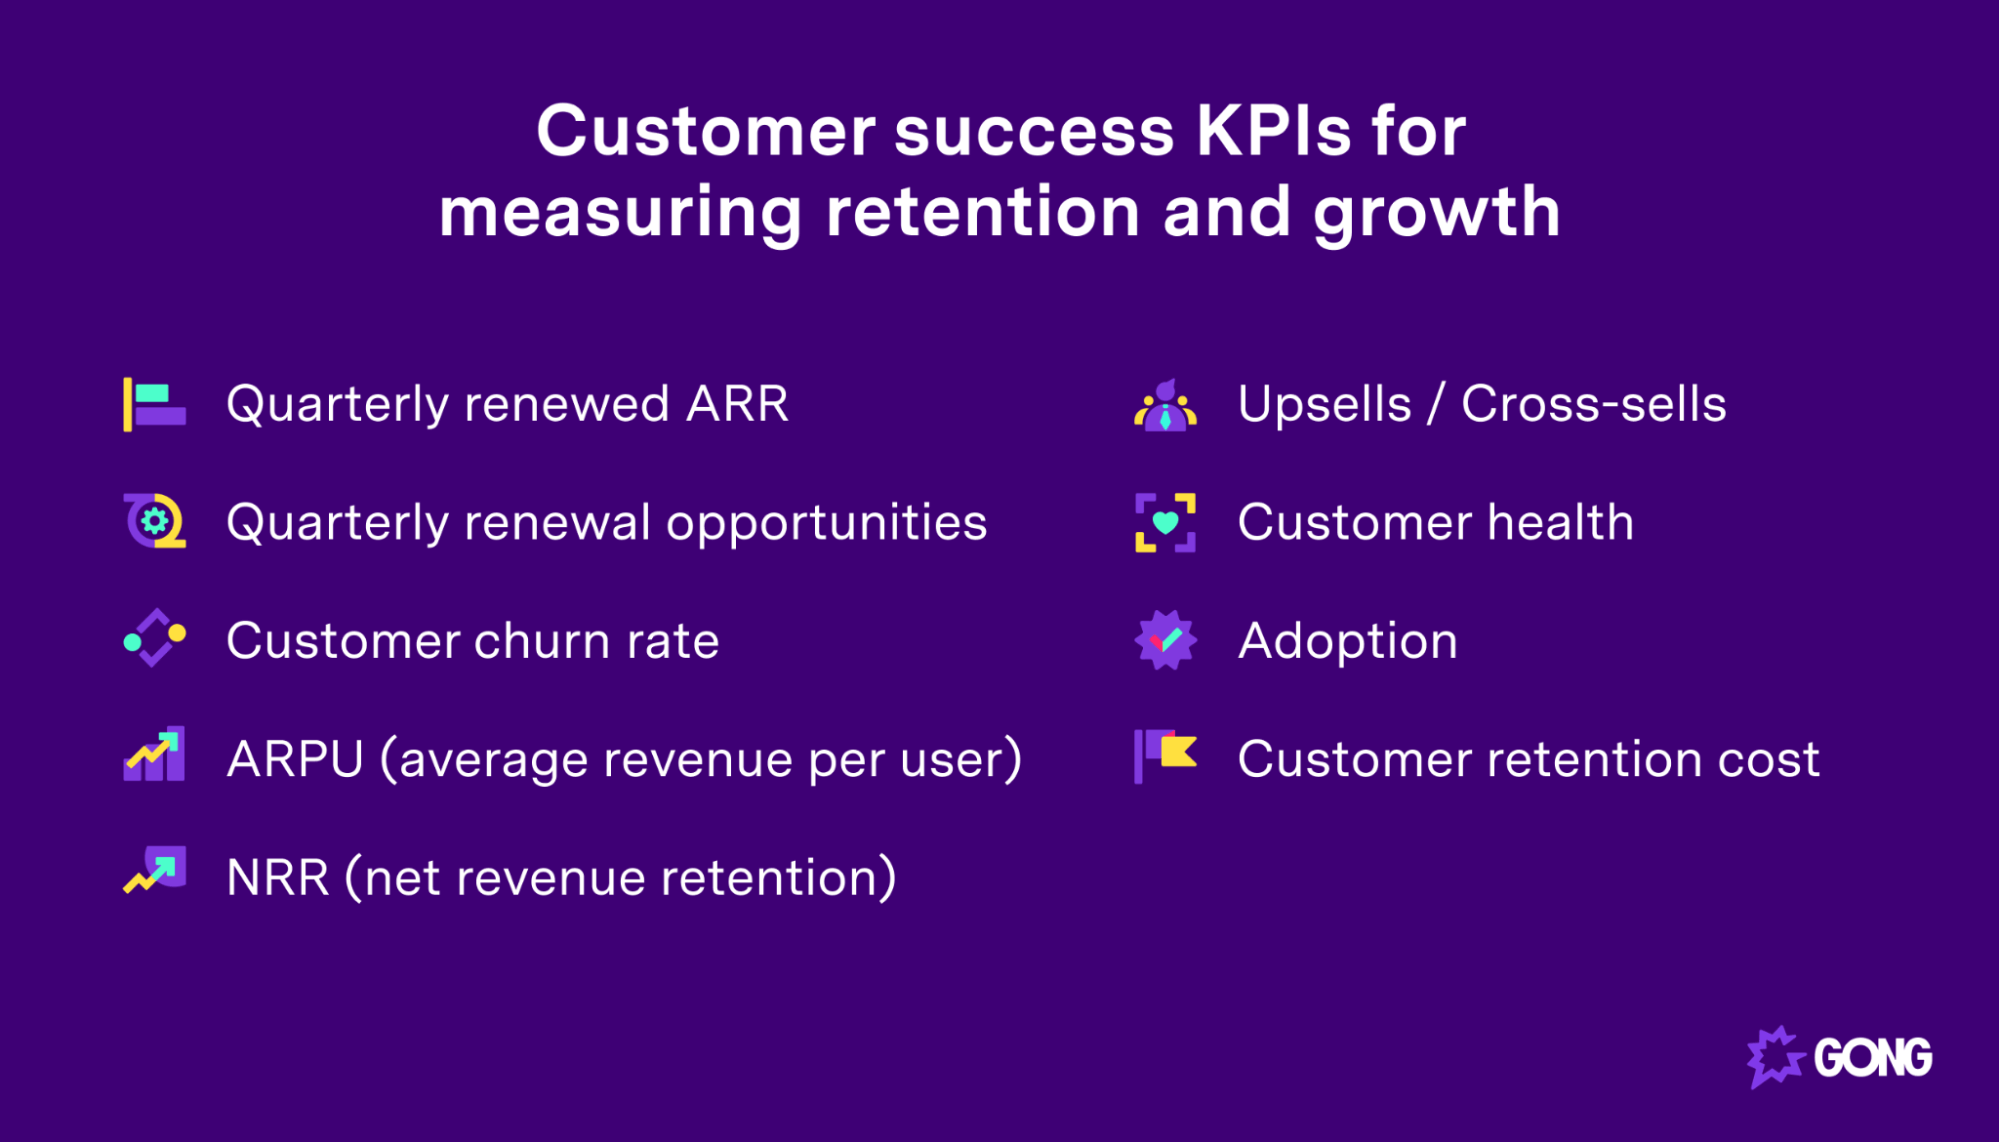 Customer success KPIs for measuring retention and growth